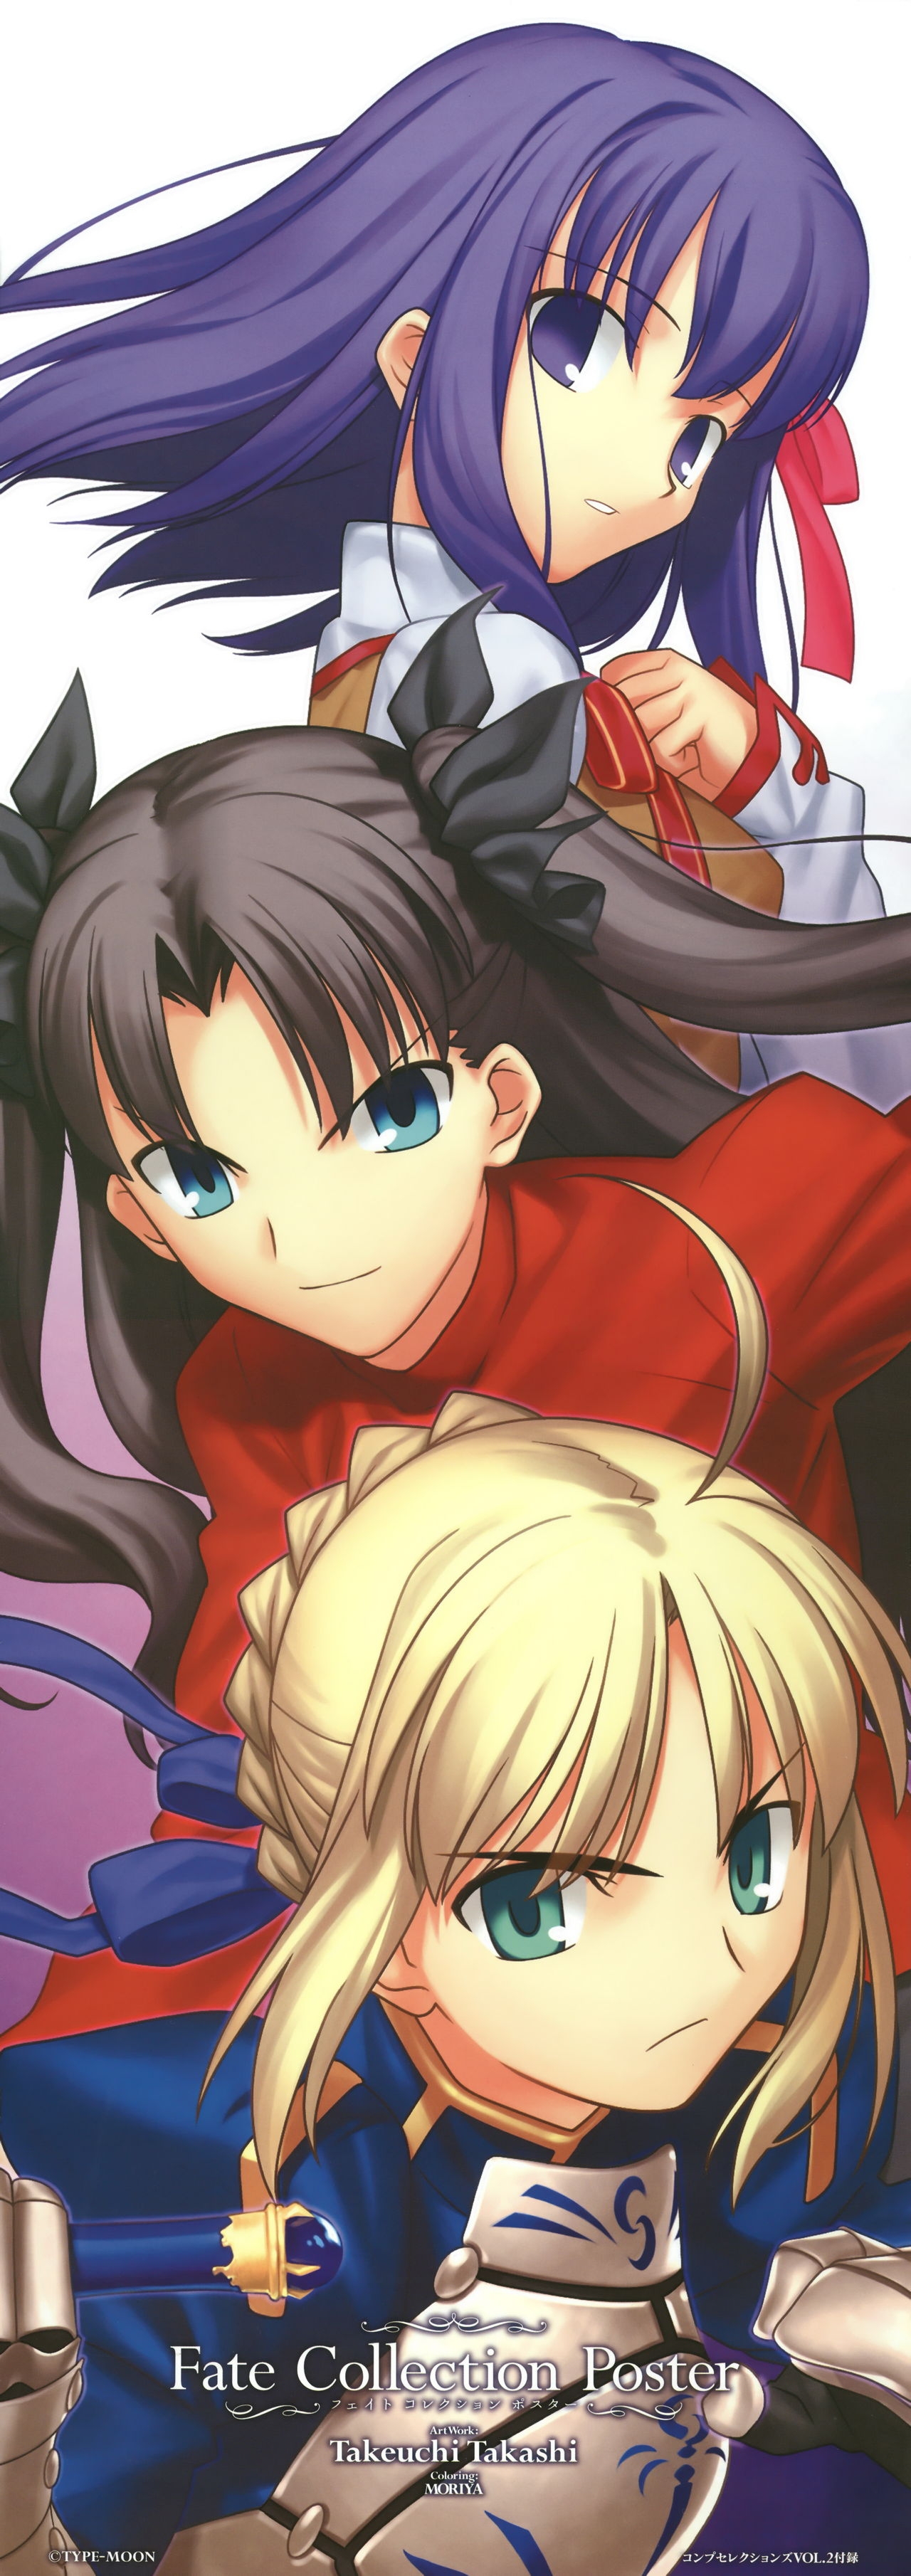 Fate Collection Poster 13